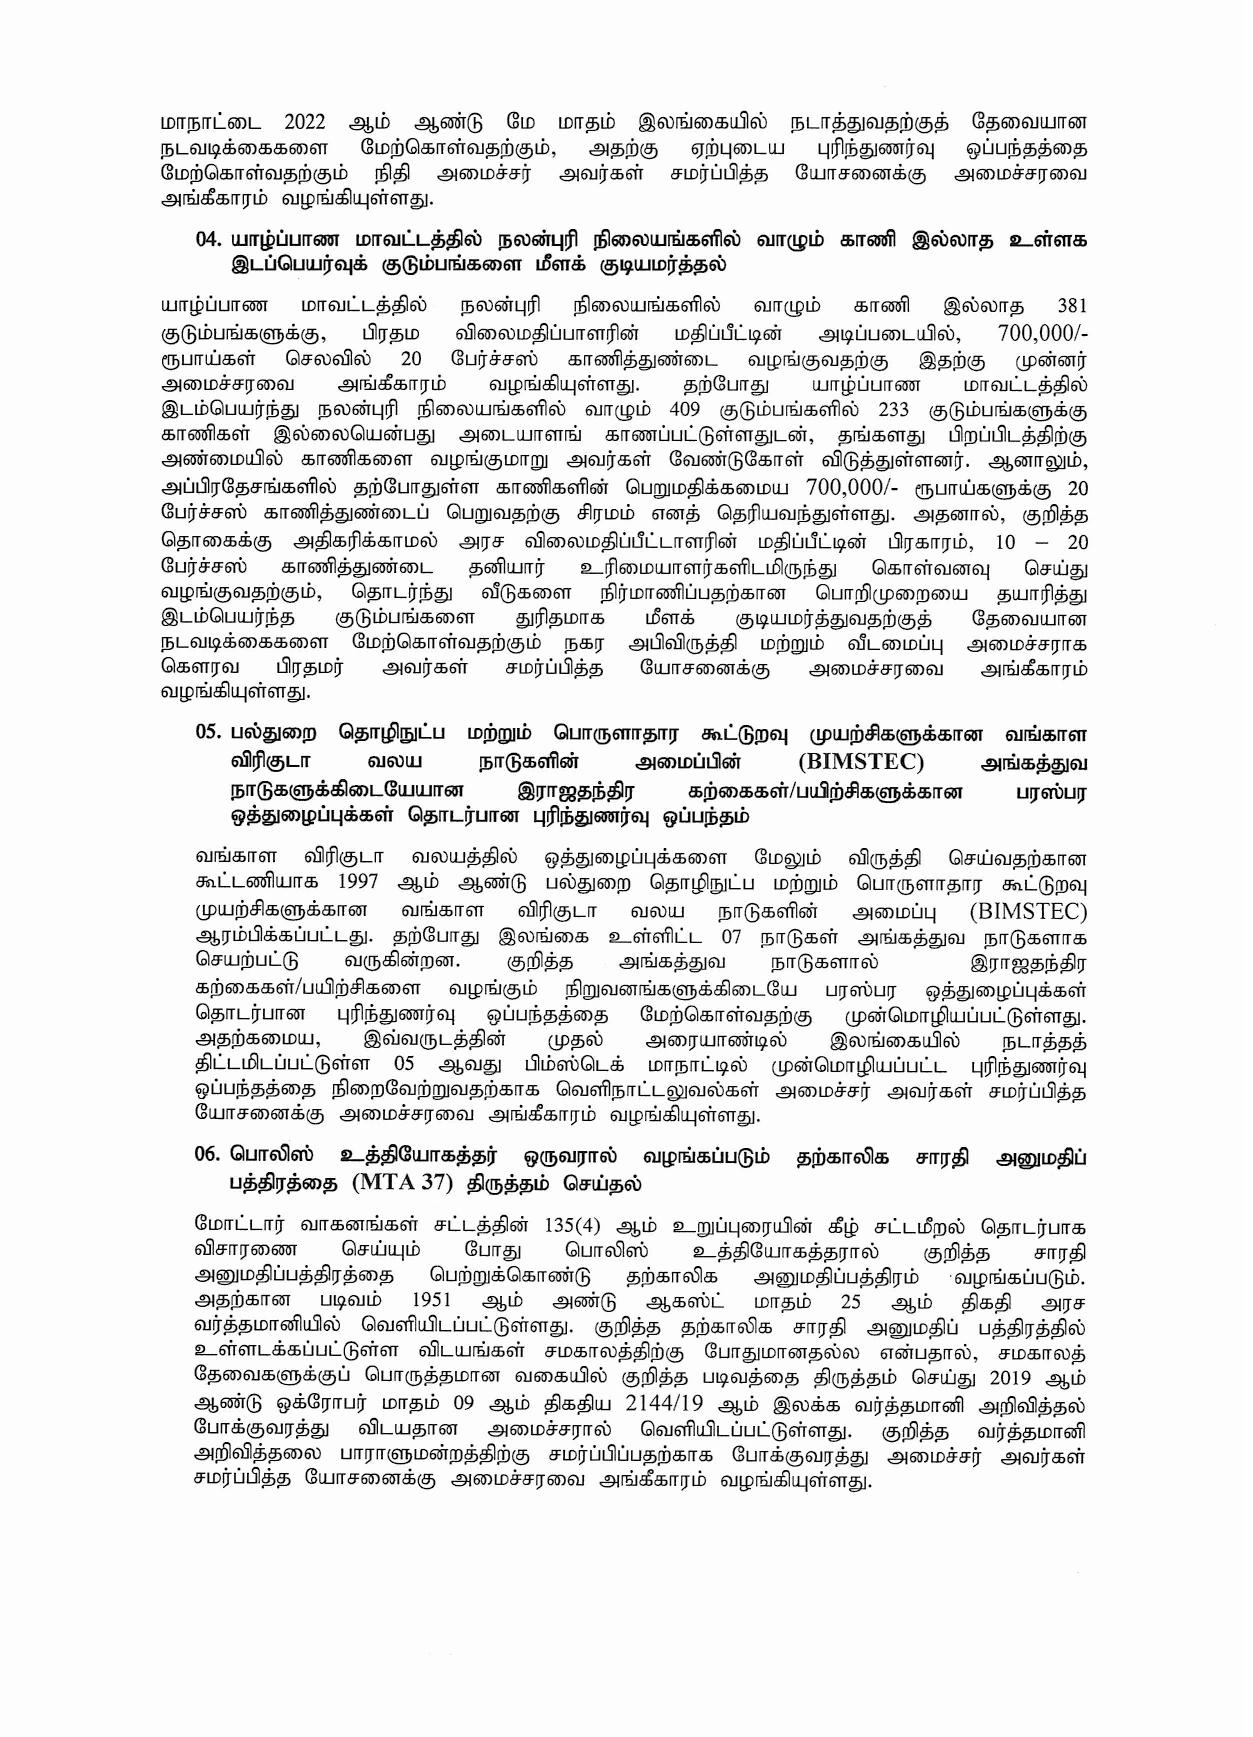 Cabinet Decision on 01.02.2021 Tamil page 002